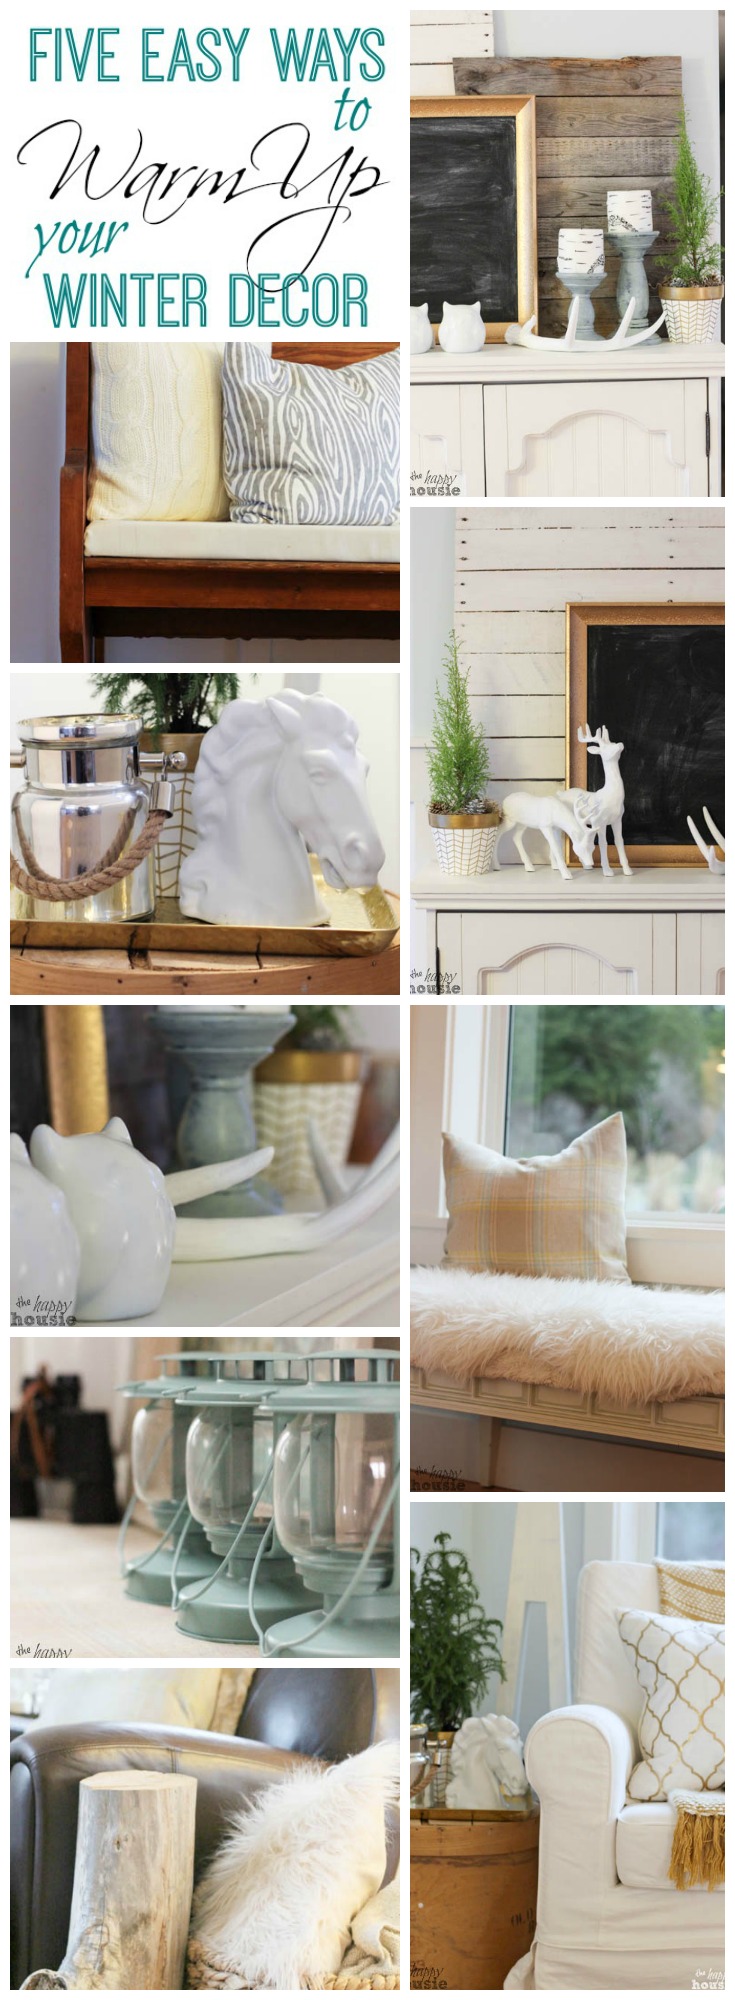 Five Easy Ways to Warm Up Your Winter decorating at The Happy Housie graphic.